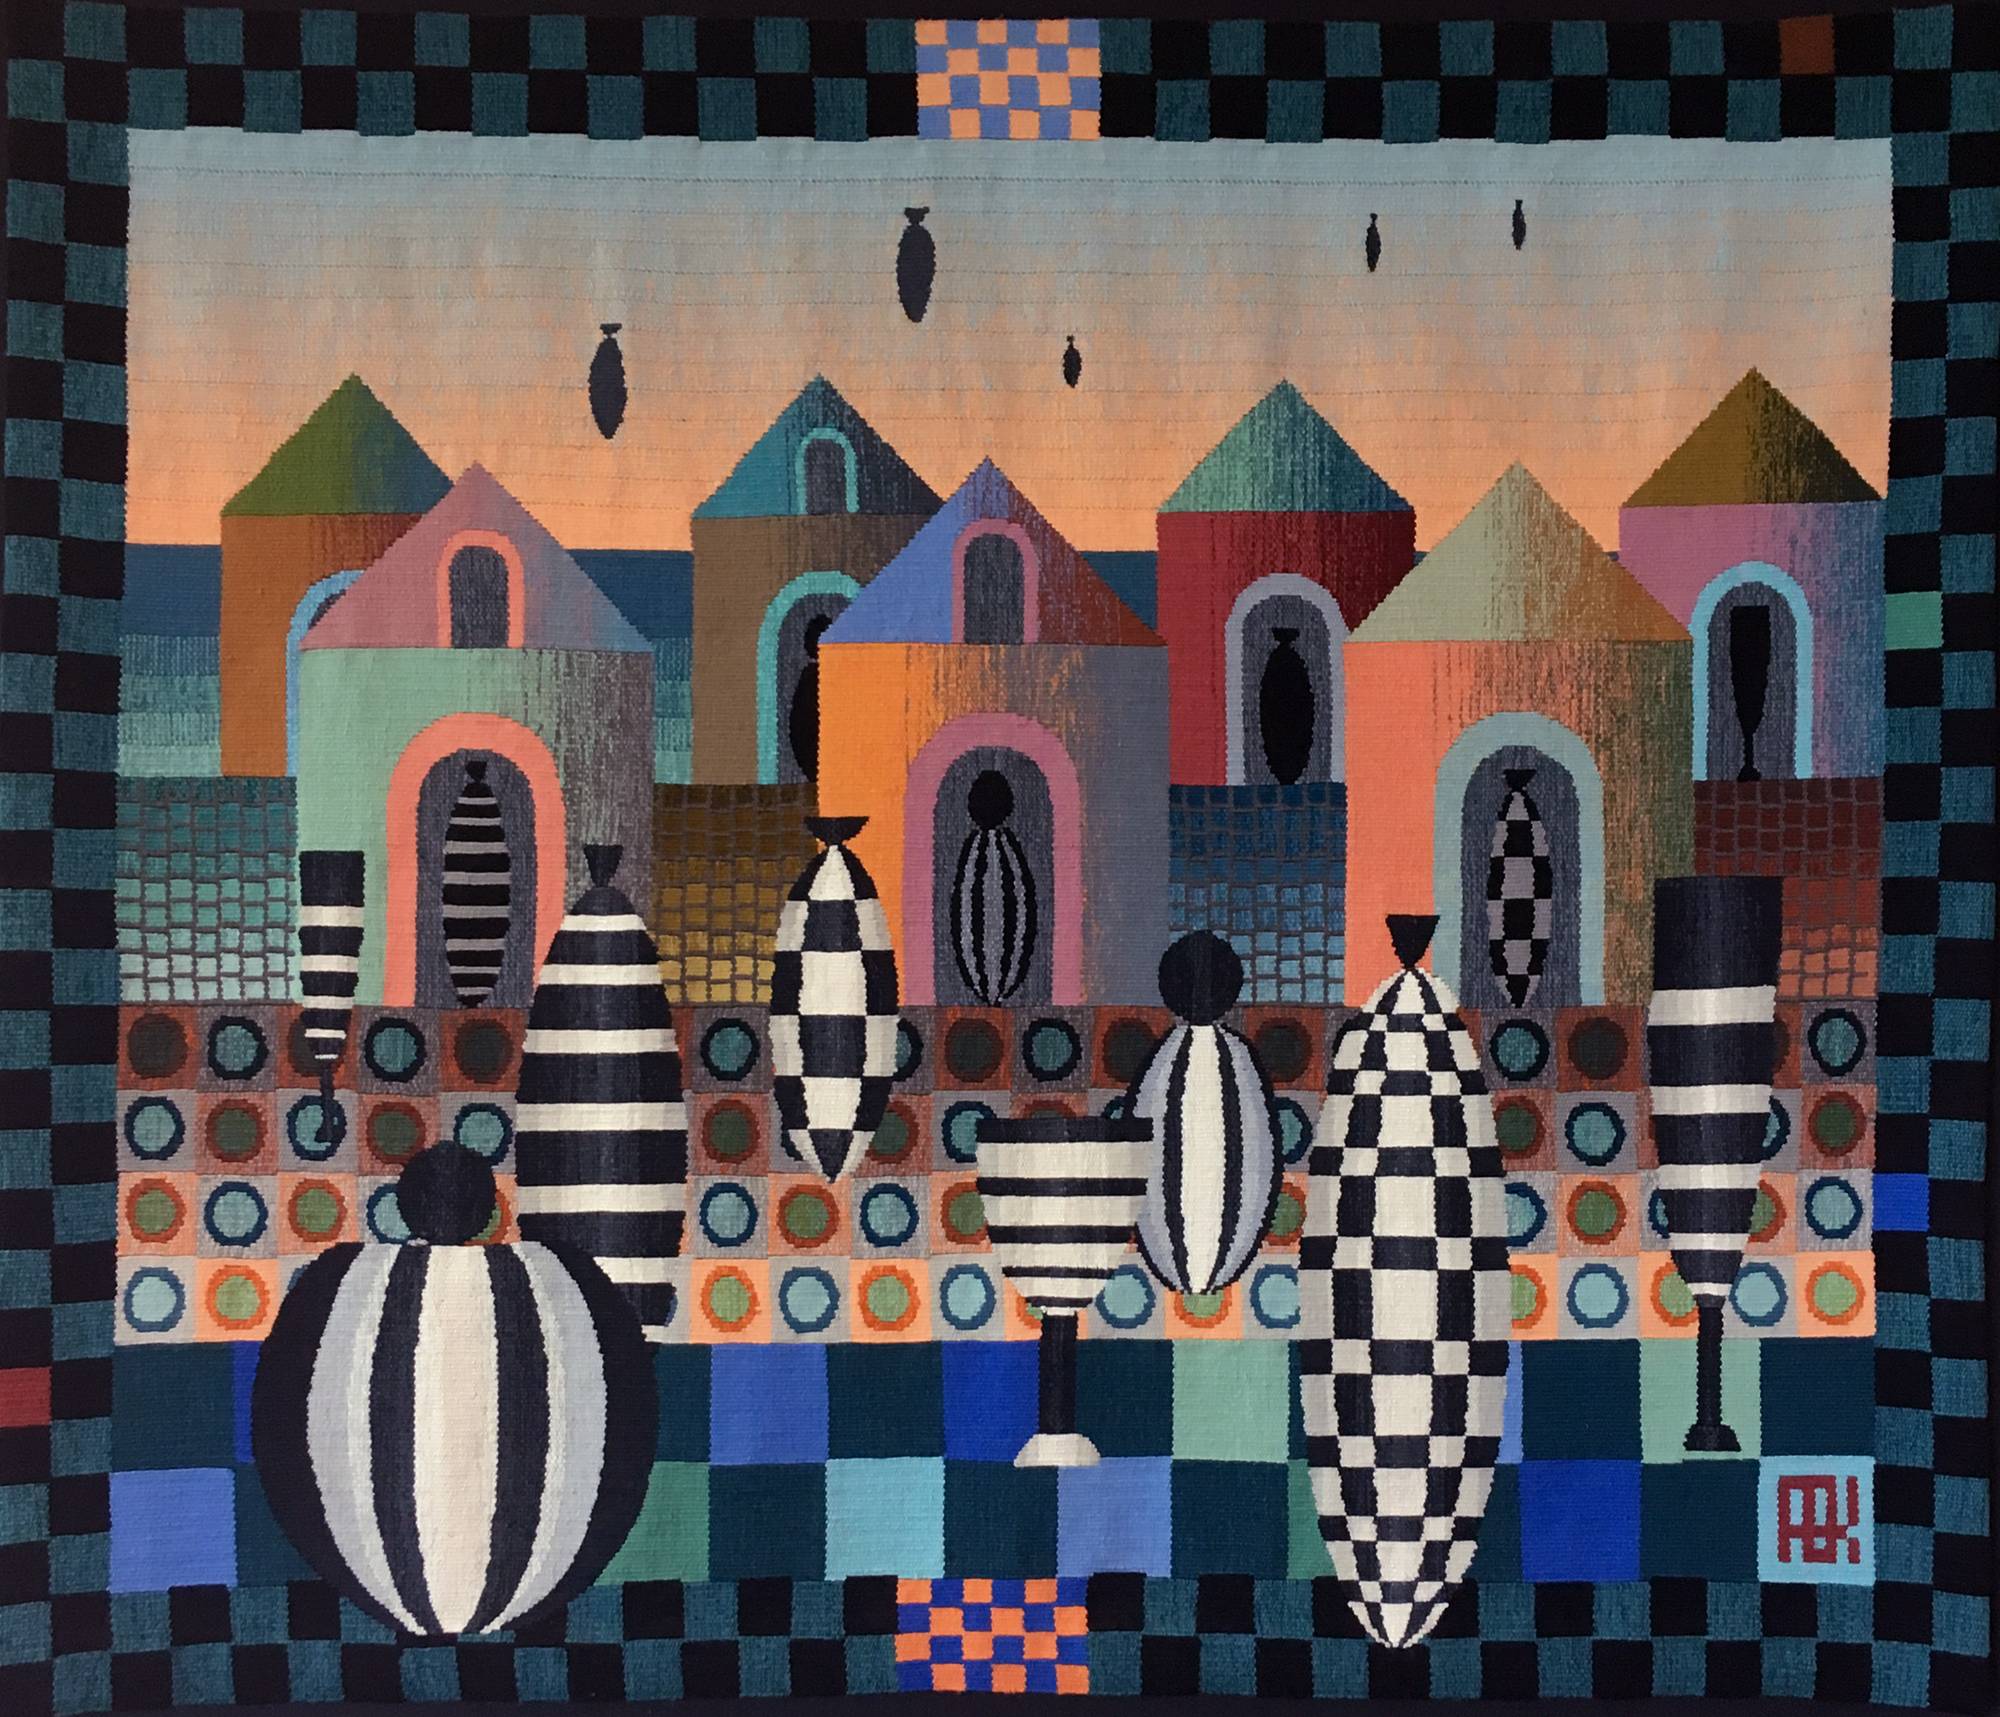 textile art featuring skyline and balloons